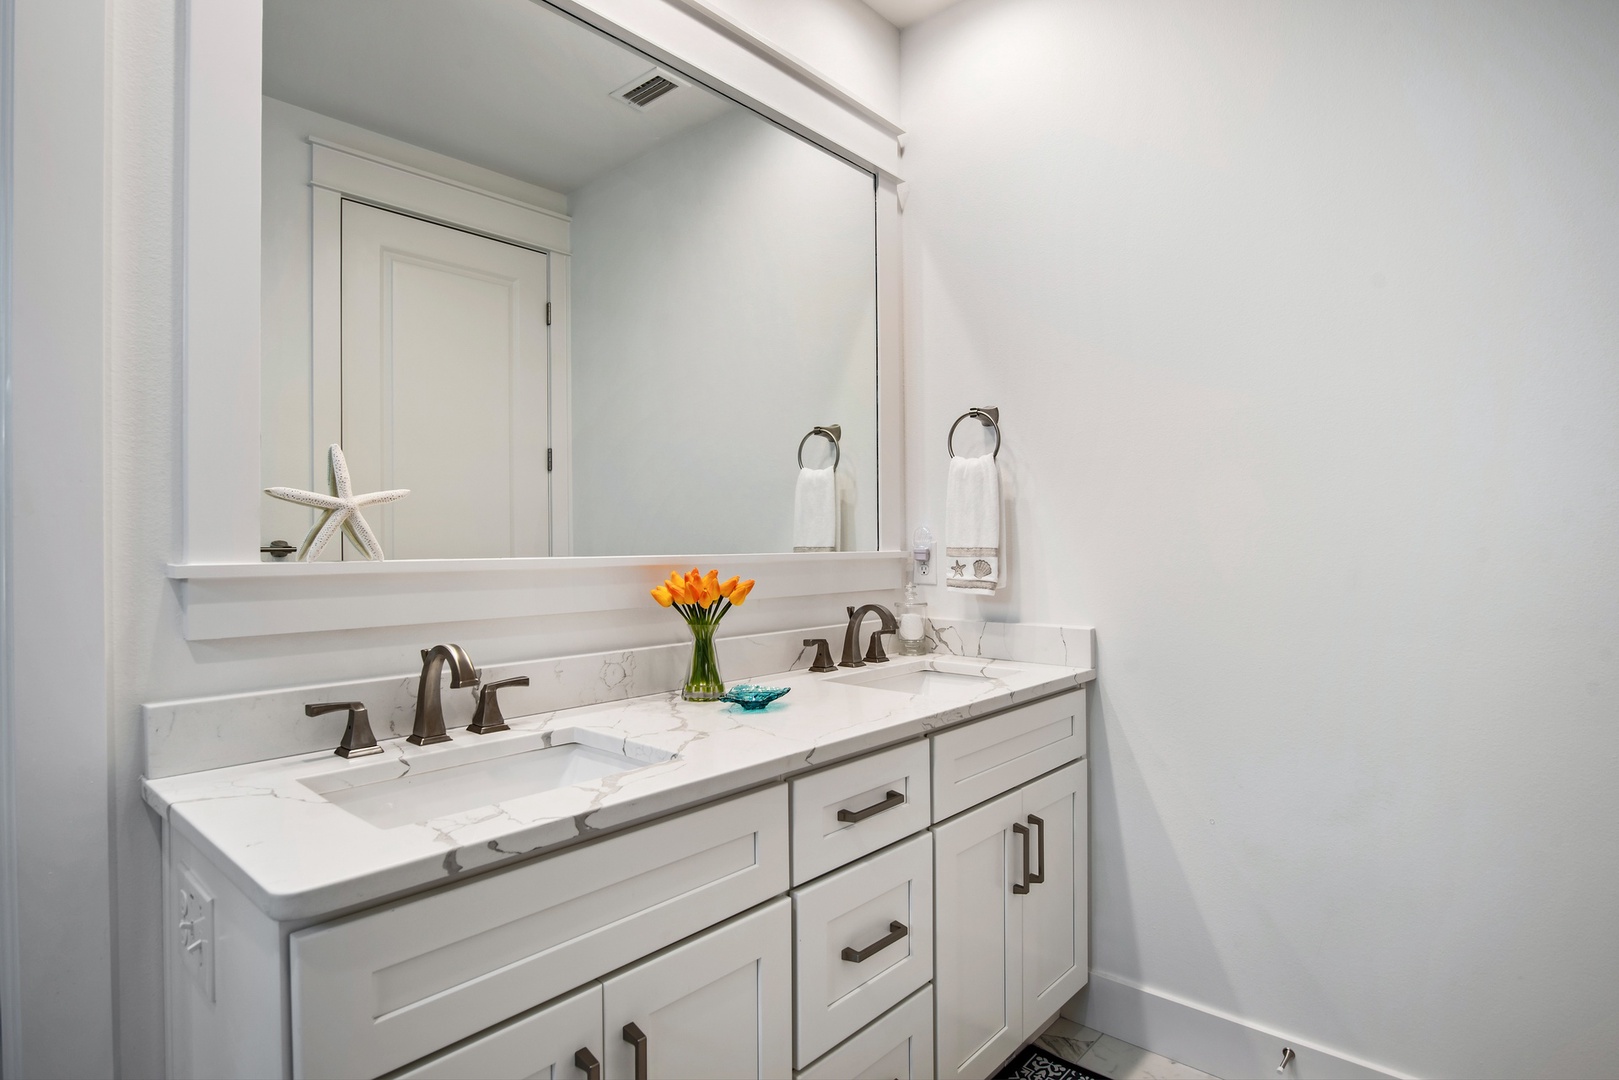 The master bathroom includes dual vanities for plenty of space!